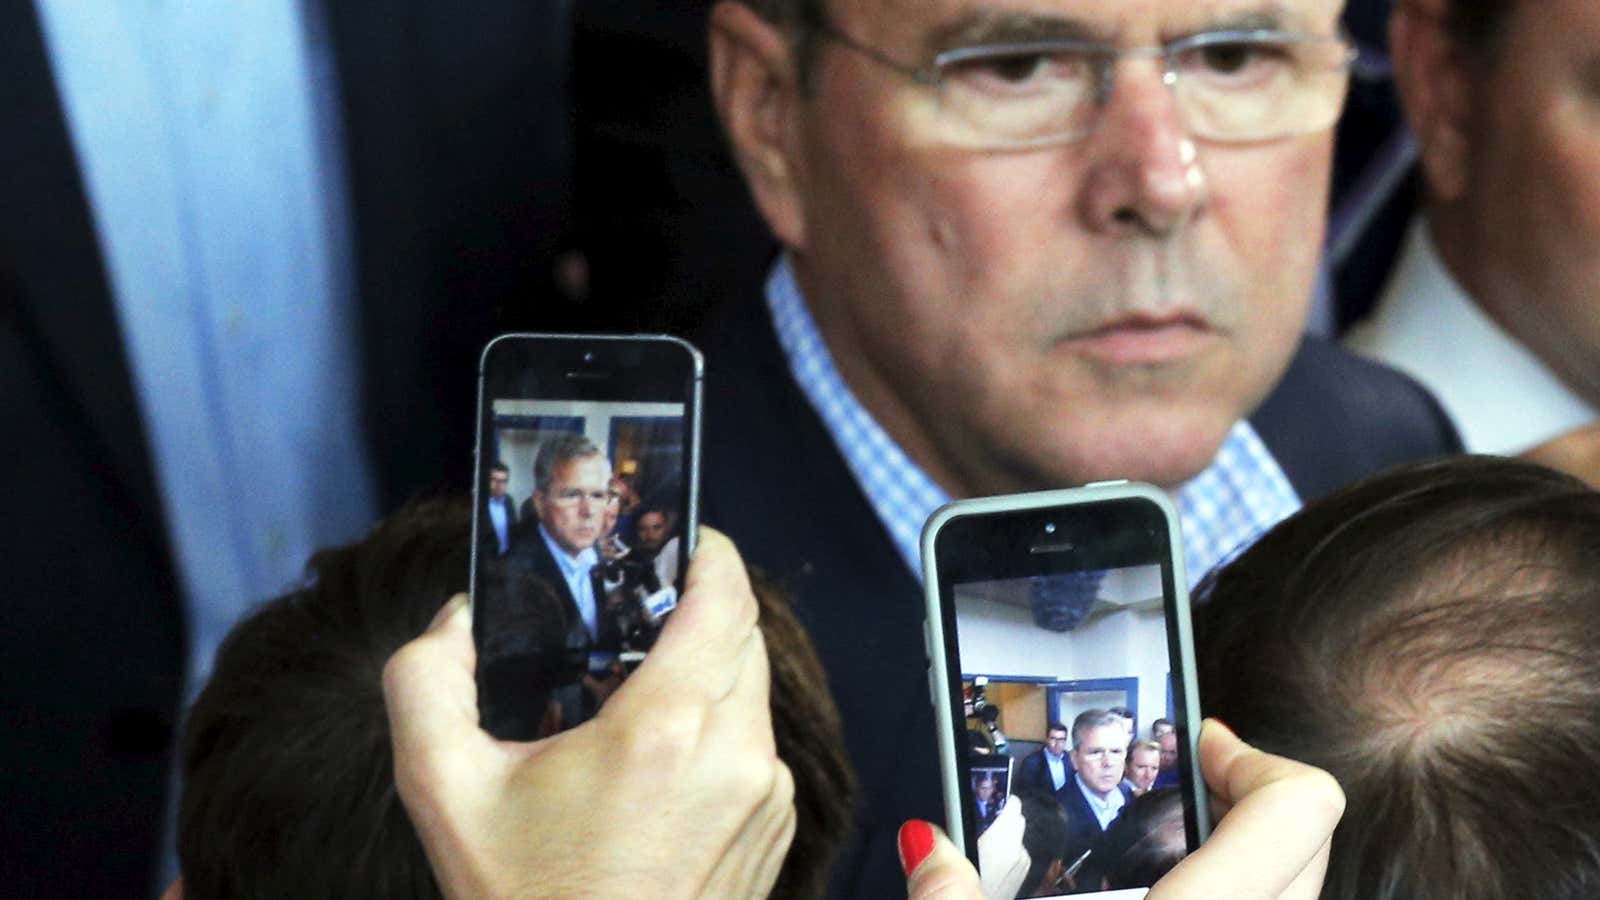 If you tweet those Jeb pics, will they be treated equally on the internet?